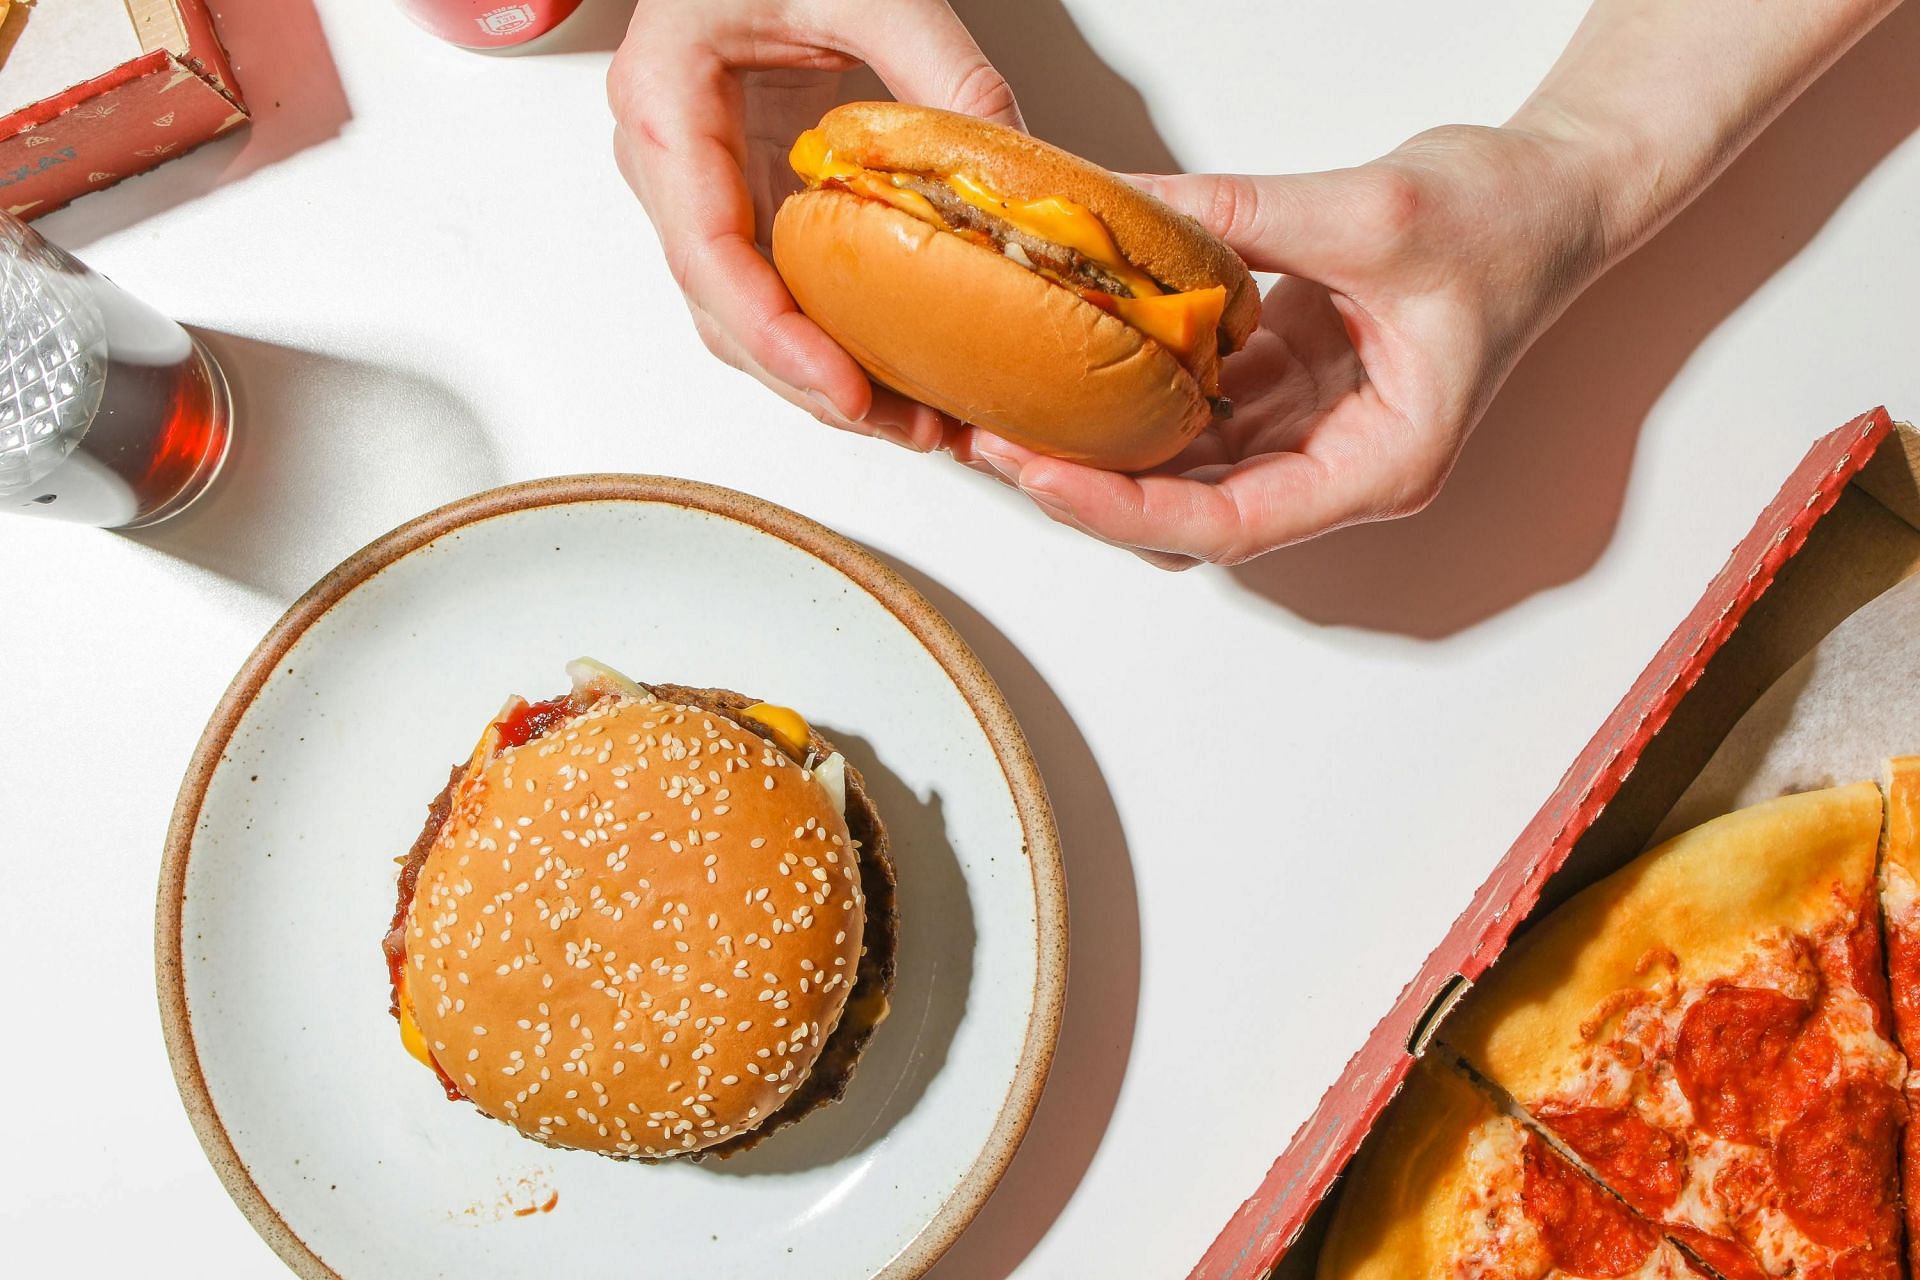 Tips to stop eating junk food (image sourced via Pexels / Photo by polina)